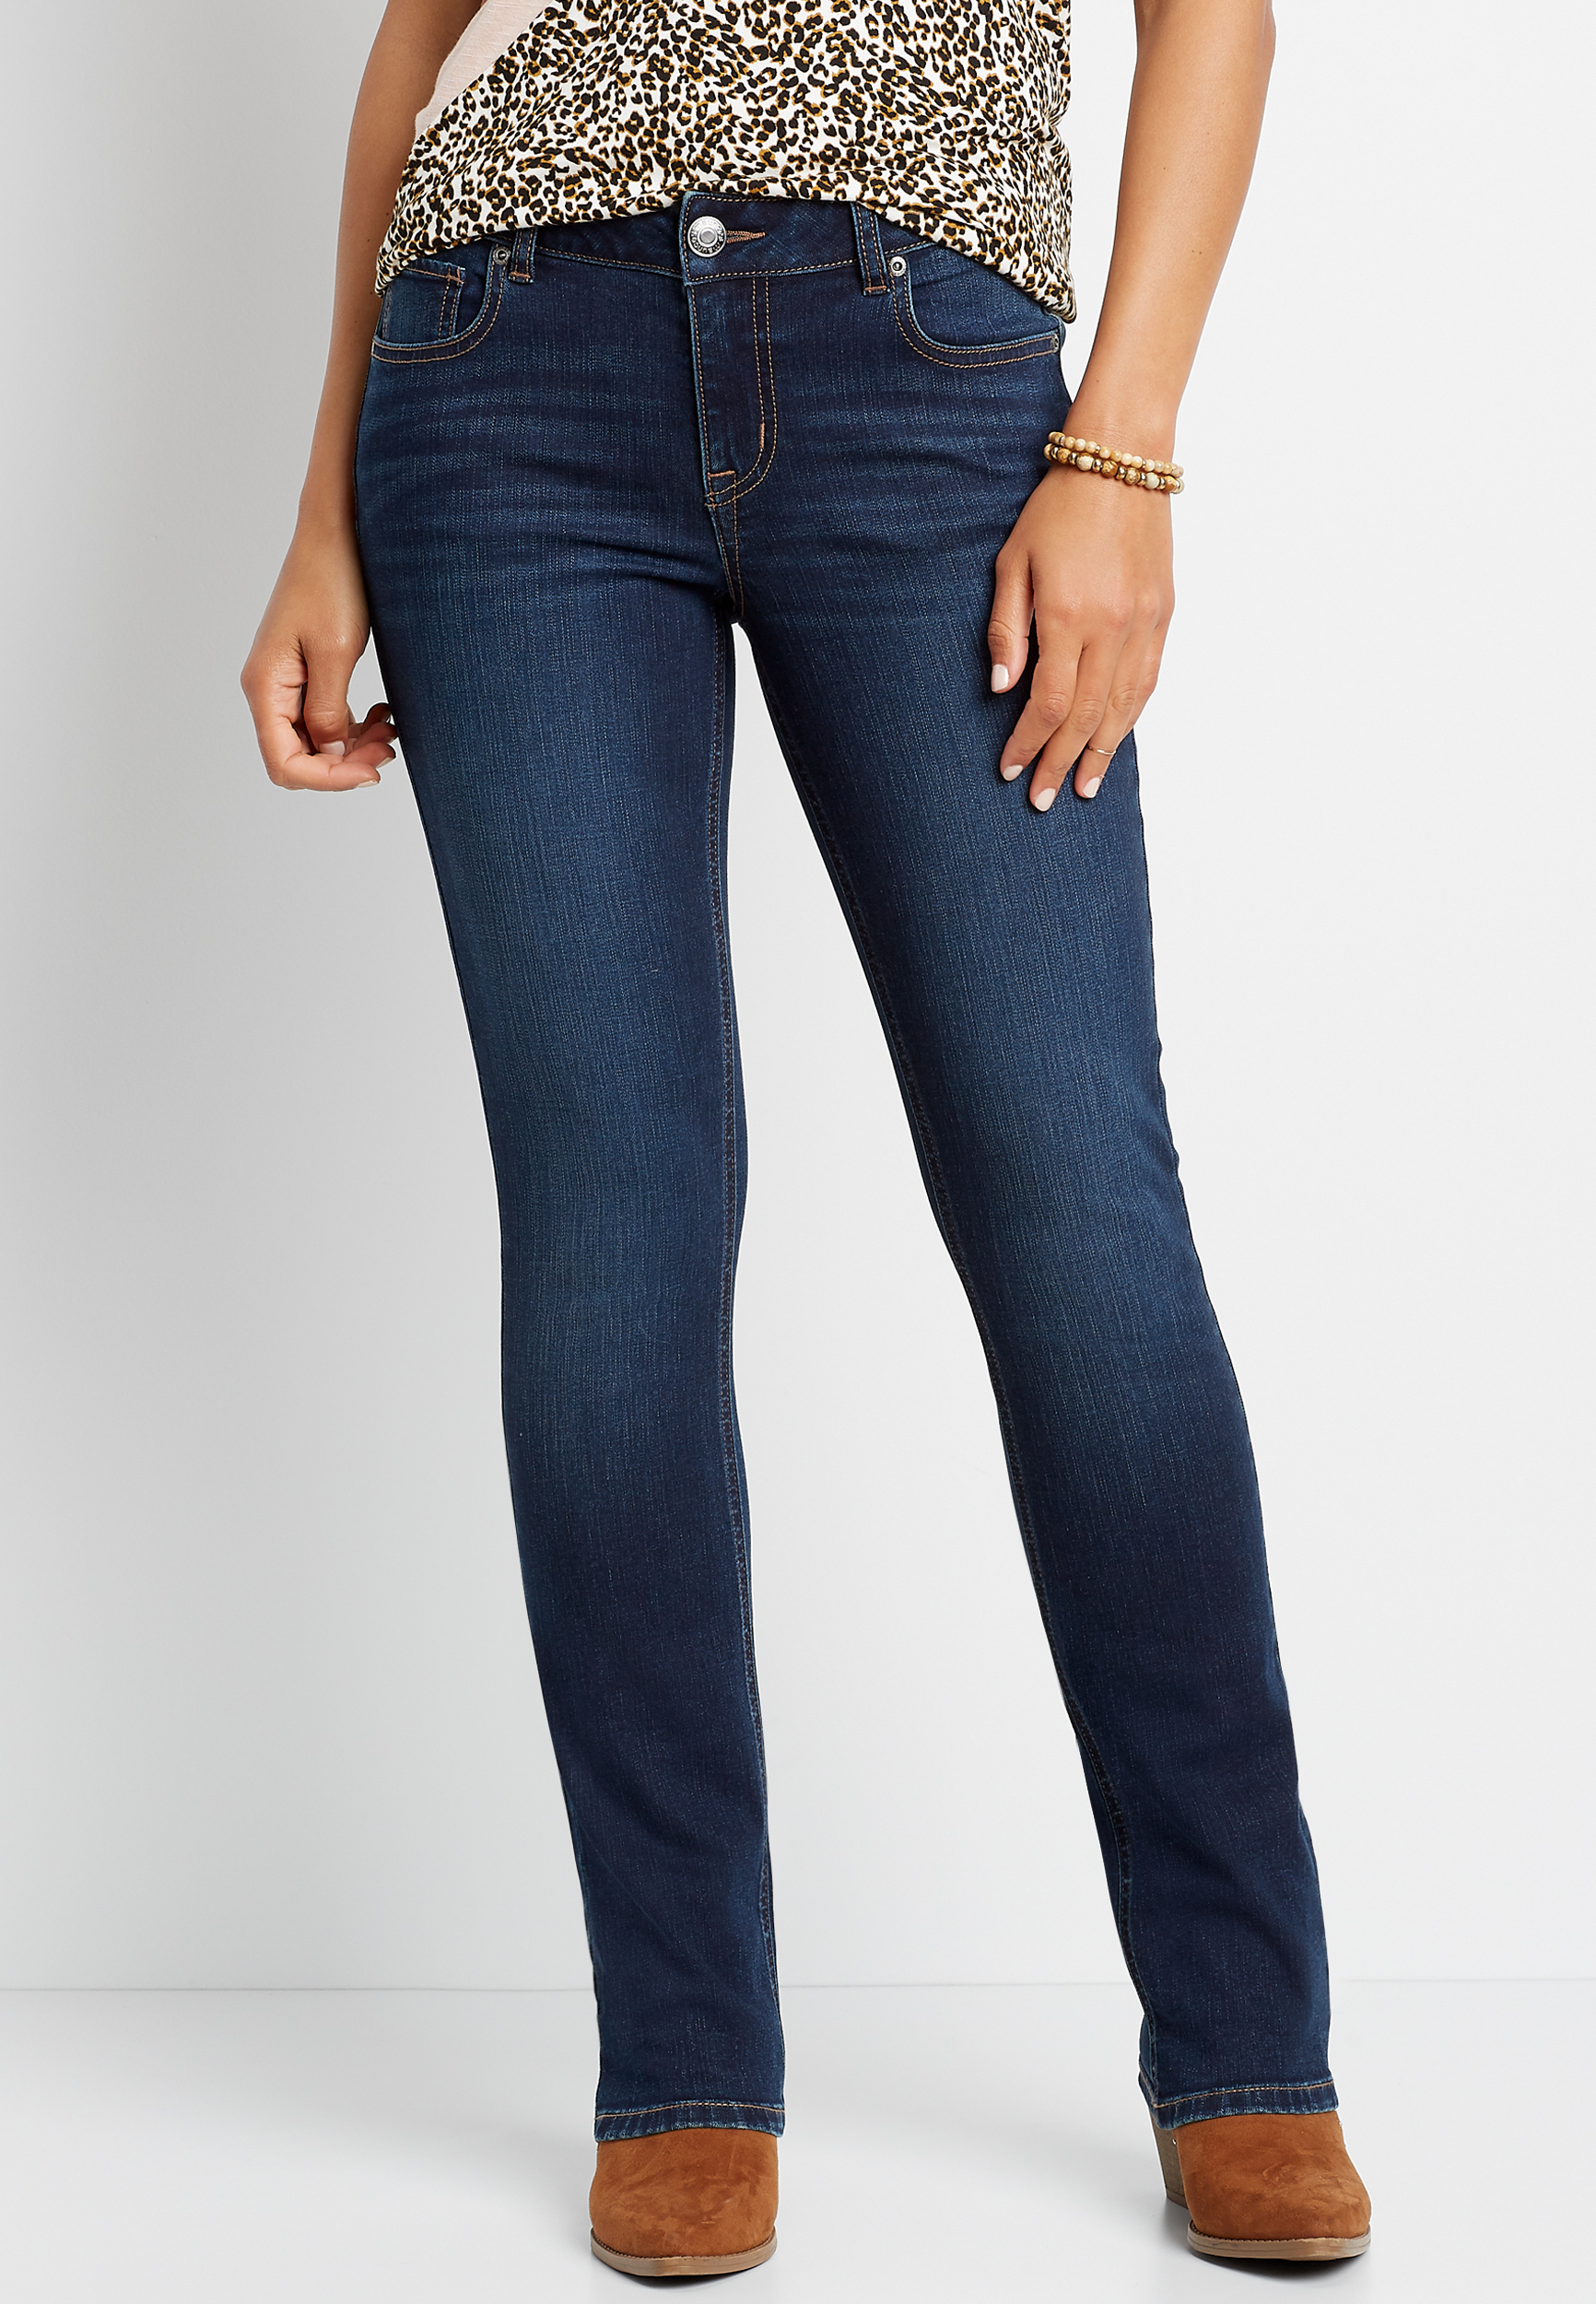 Berolige om forladelse Final m jeans by maurices™ Classic Slim Boot Mid Rise Jean | maurices